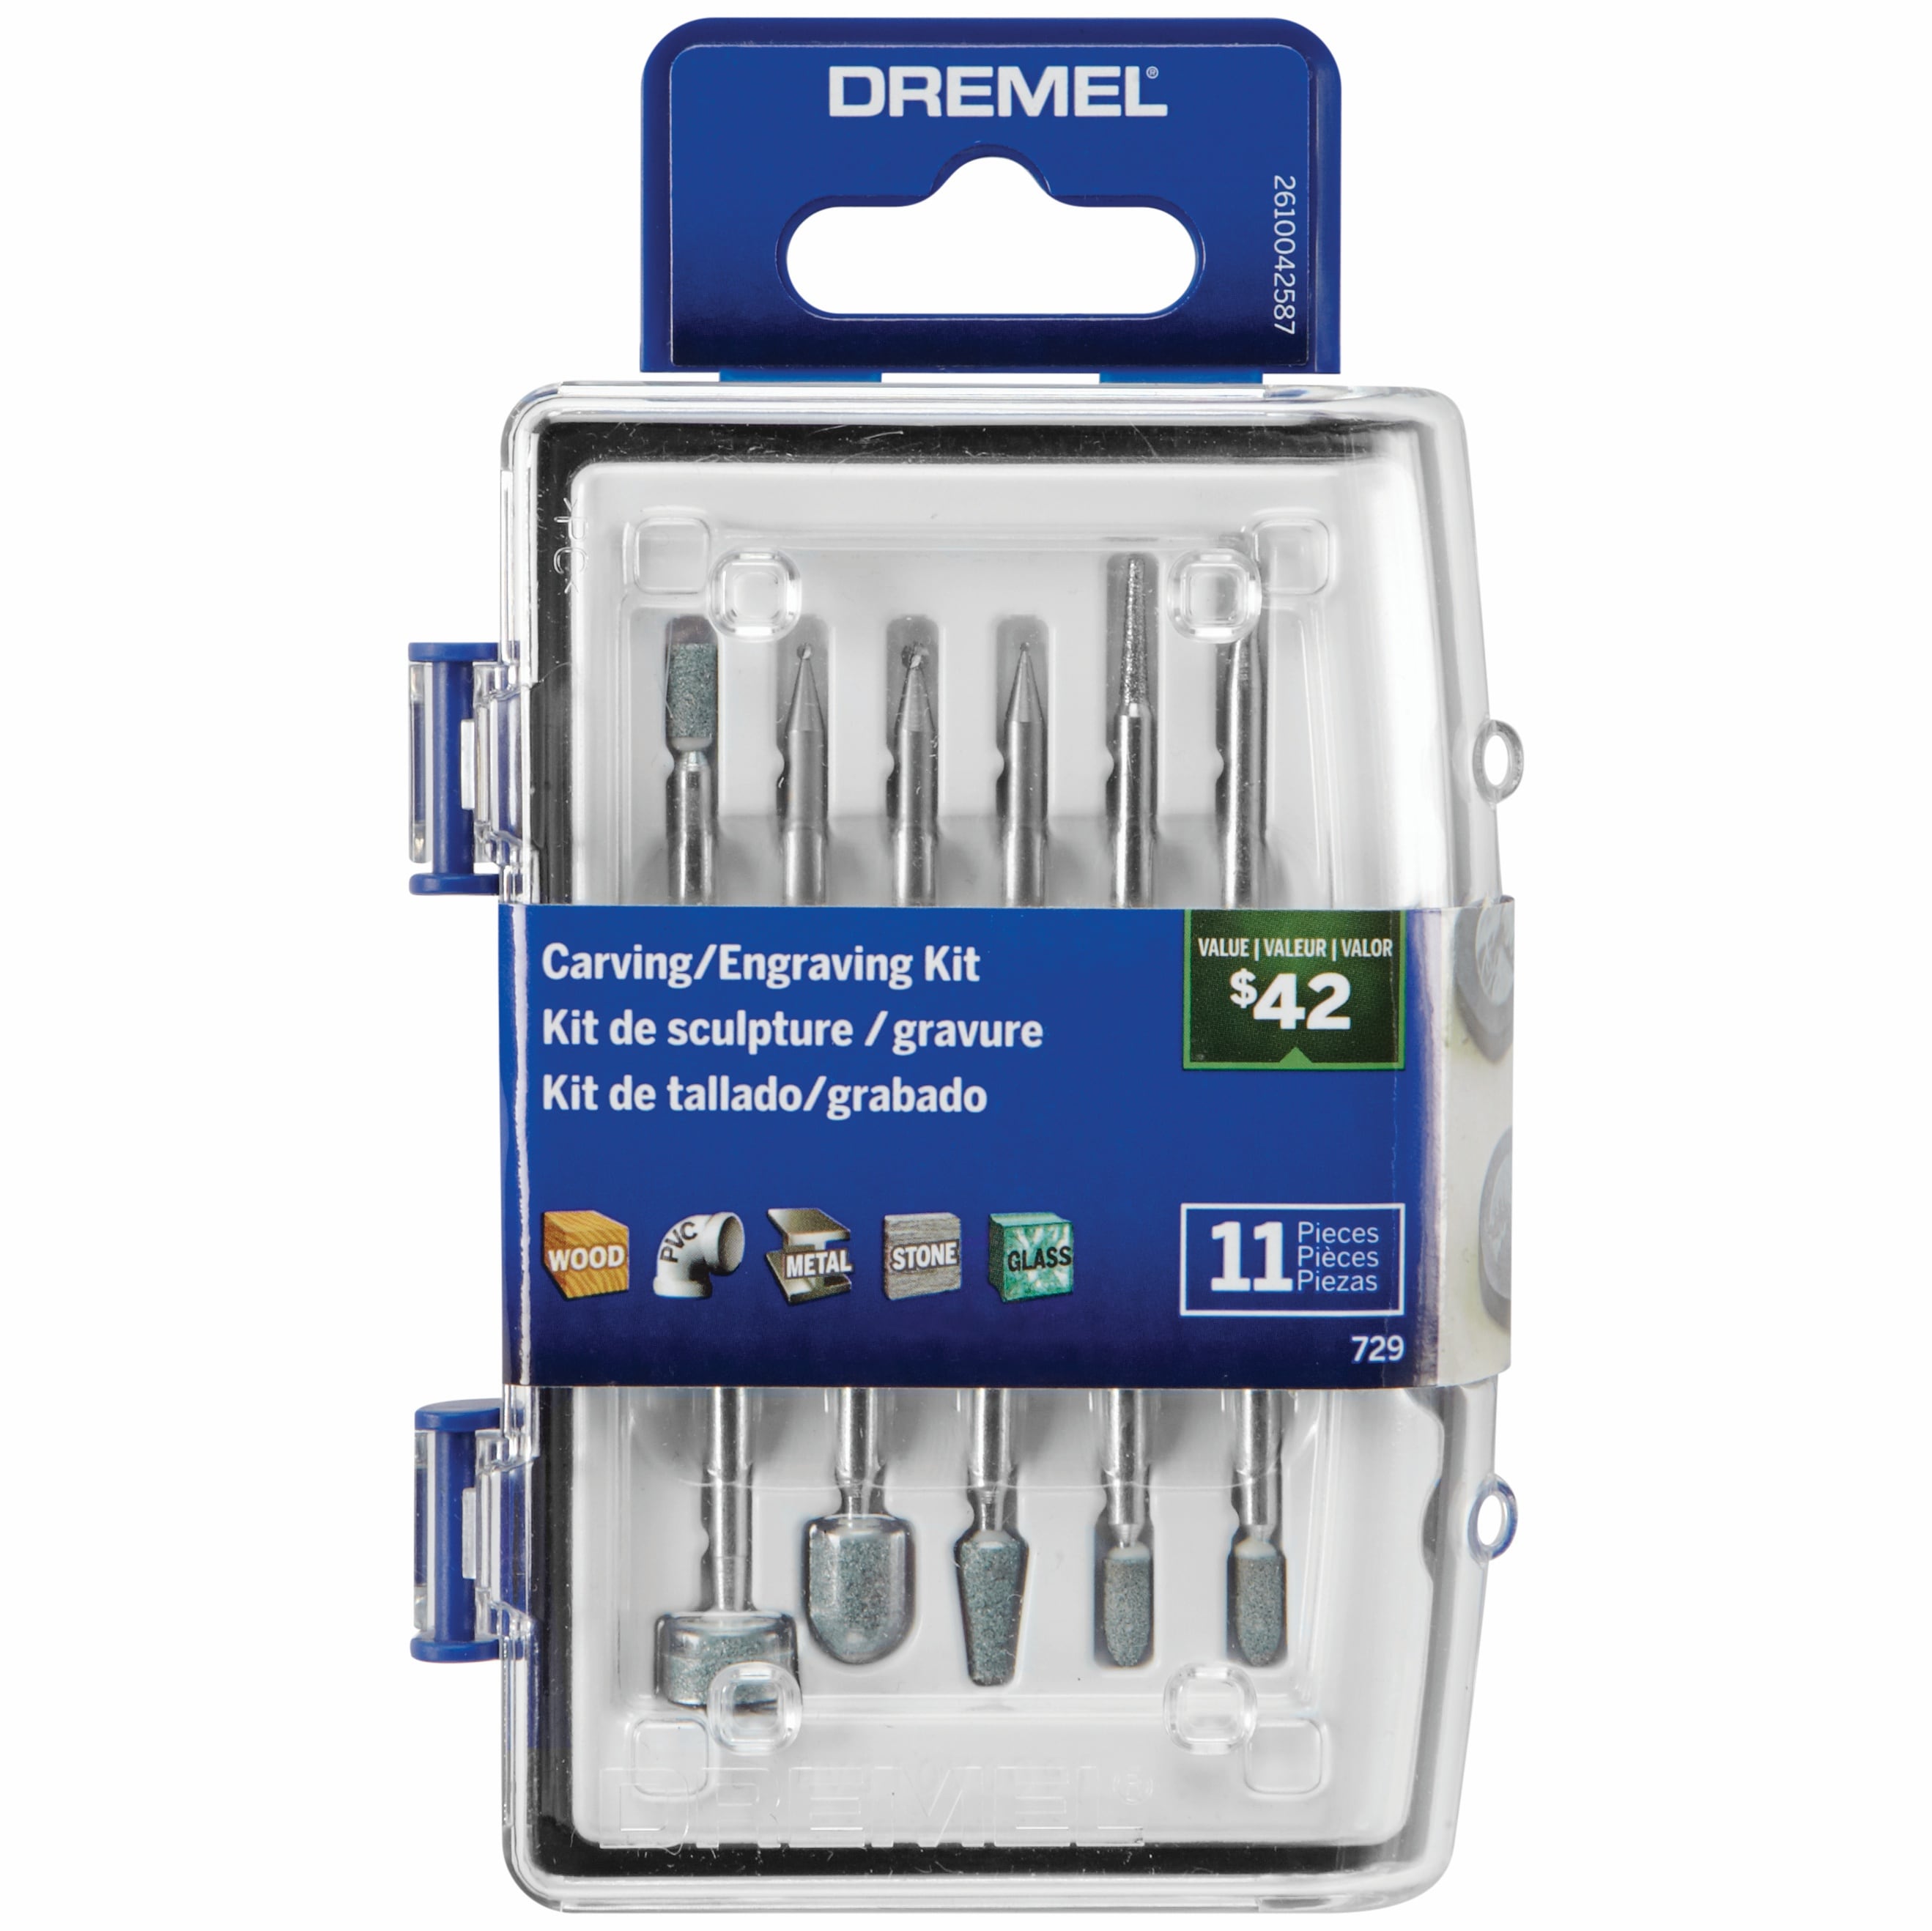 Dremel 729-01 11-Piece Carving/Engraving Accessory Micro Kit